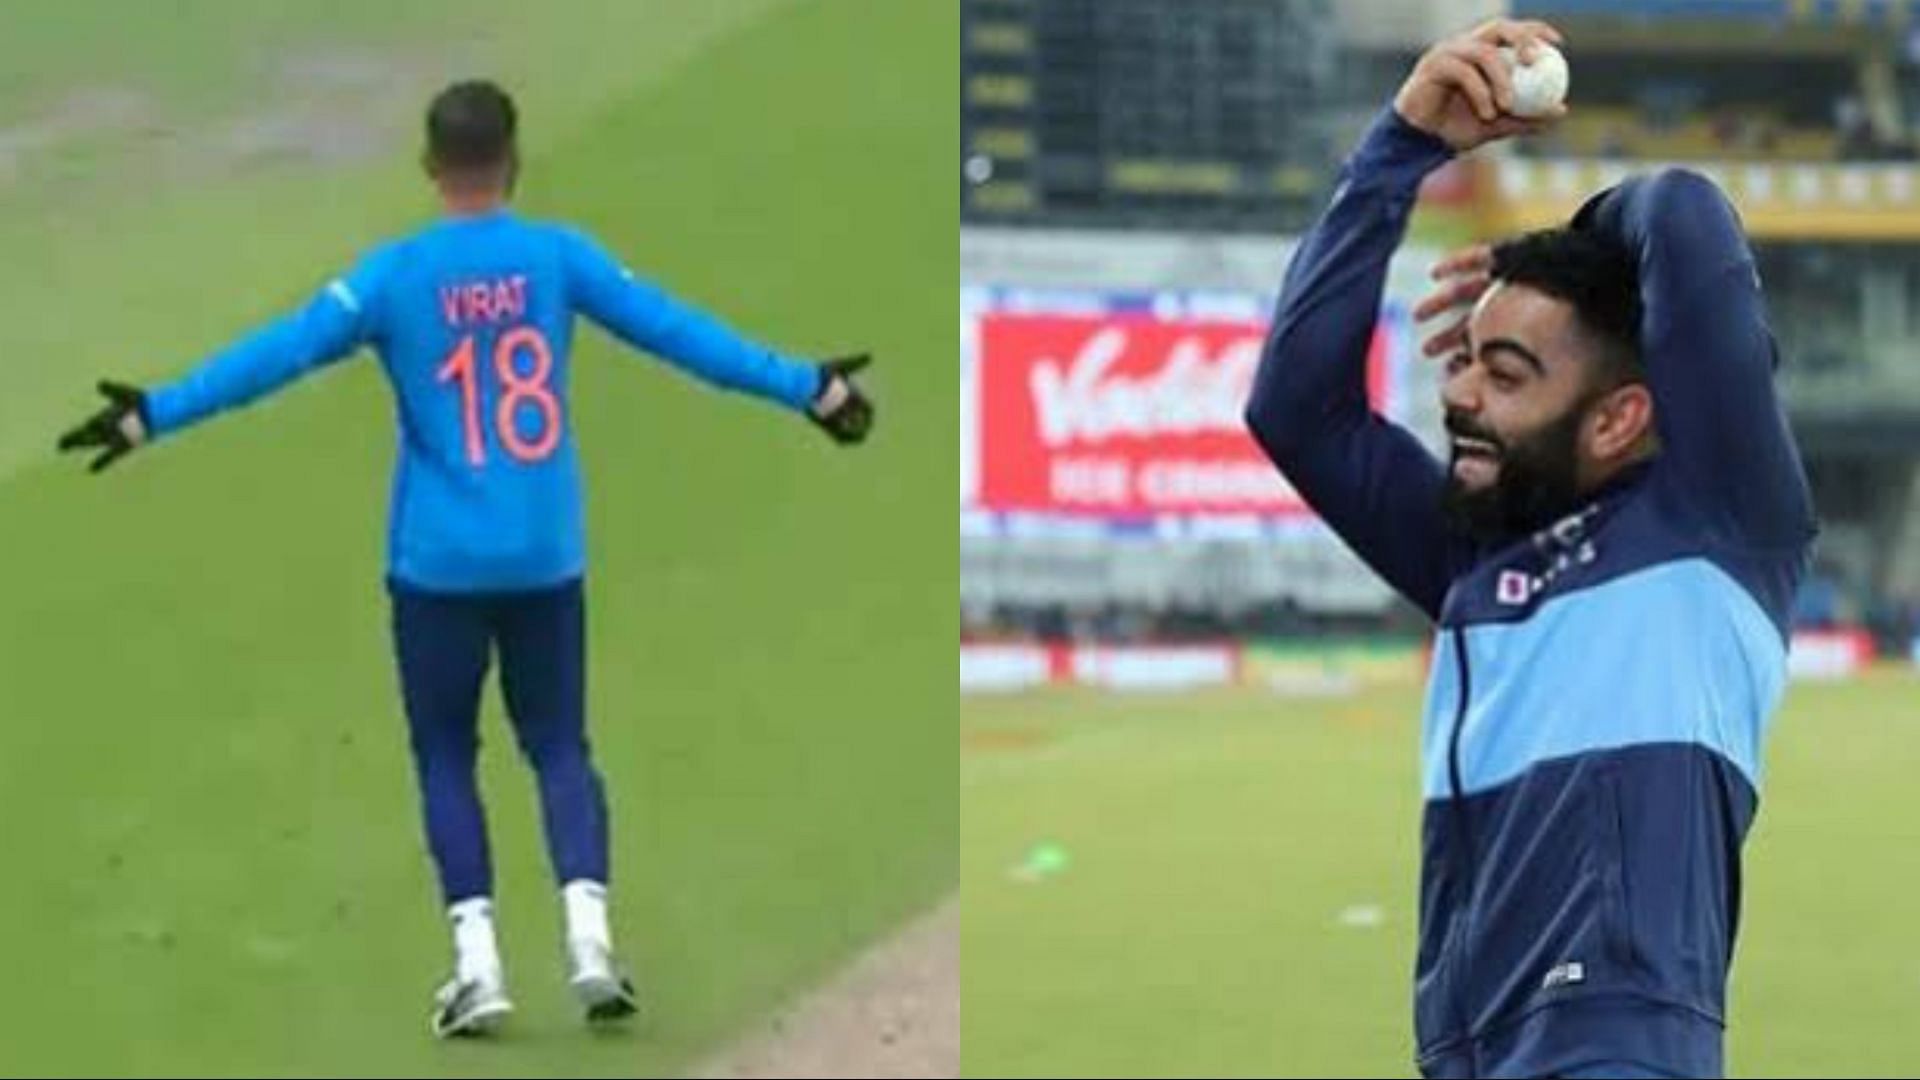 Virat Kohli has been a part of many hilarious moments on and off the field